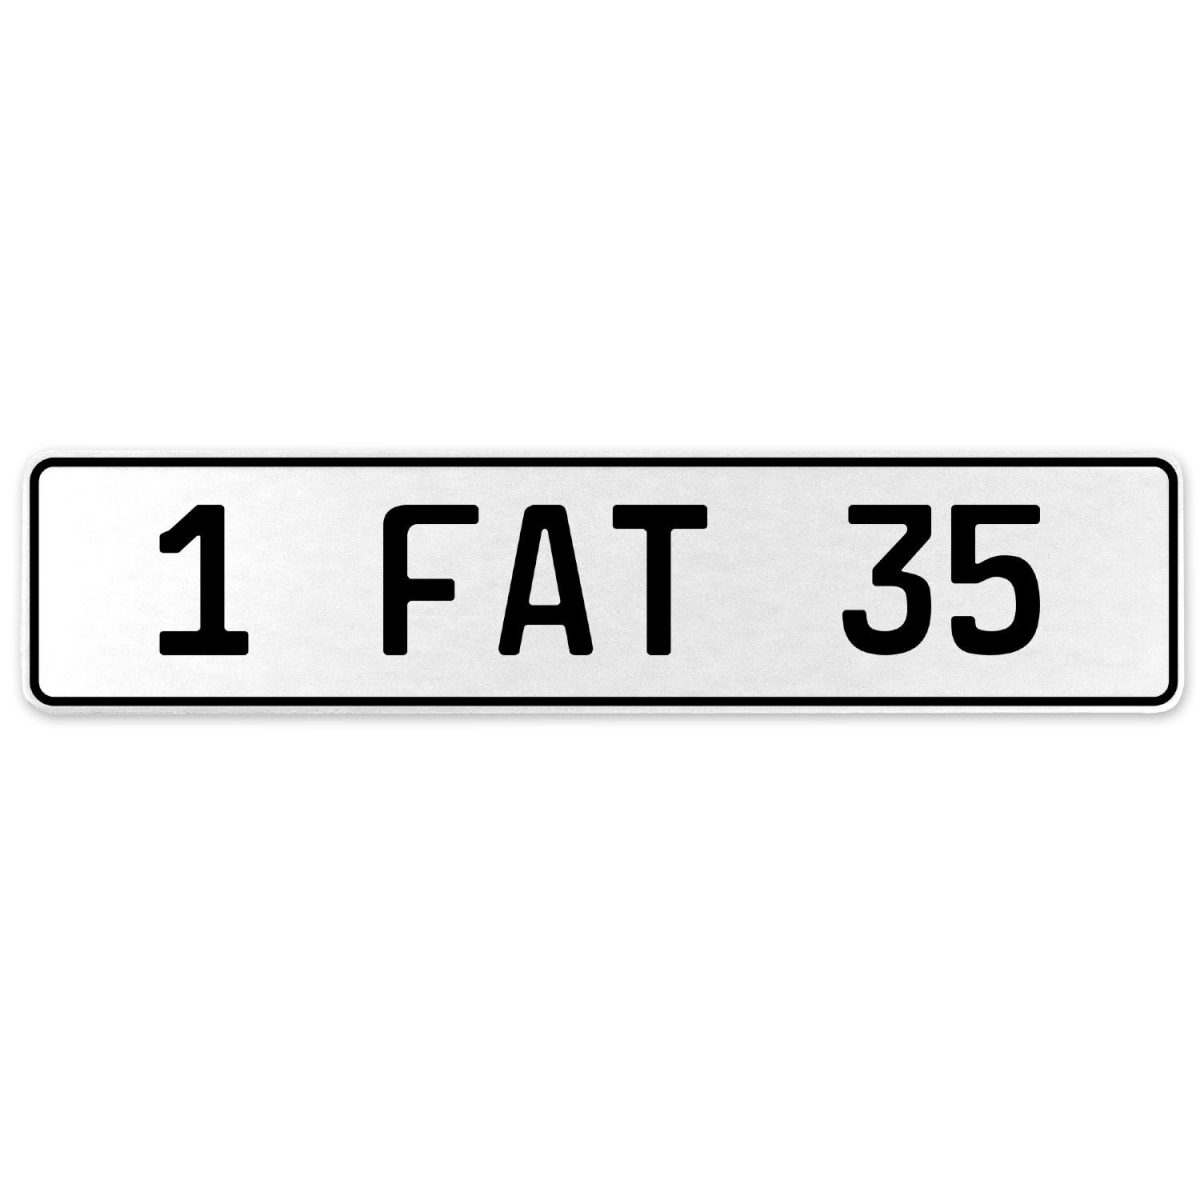 554632 1 Fat 35 - White Aluminum Street Sign Mancave Euro Plate Name Door Sign Wall